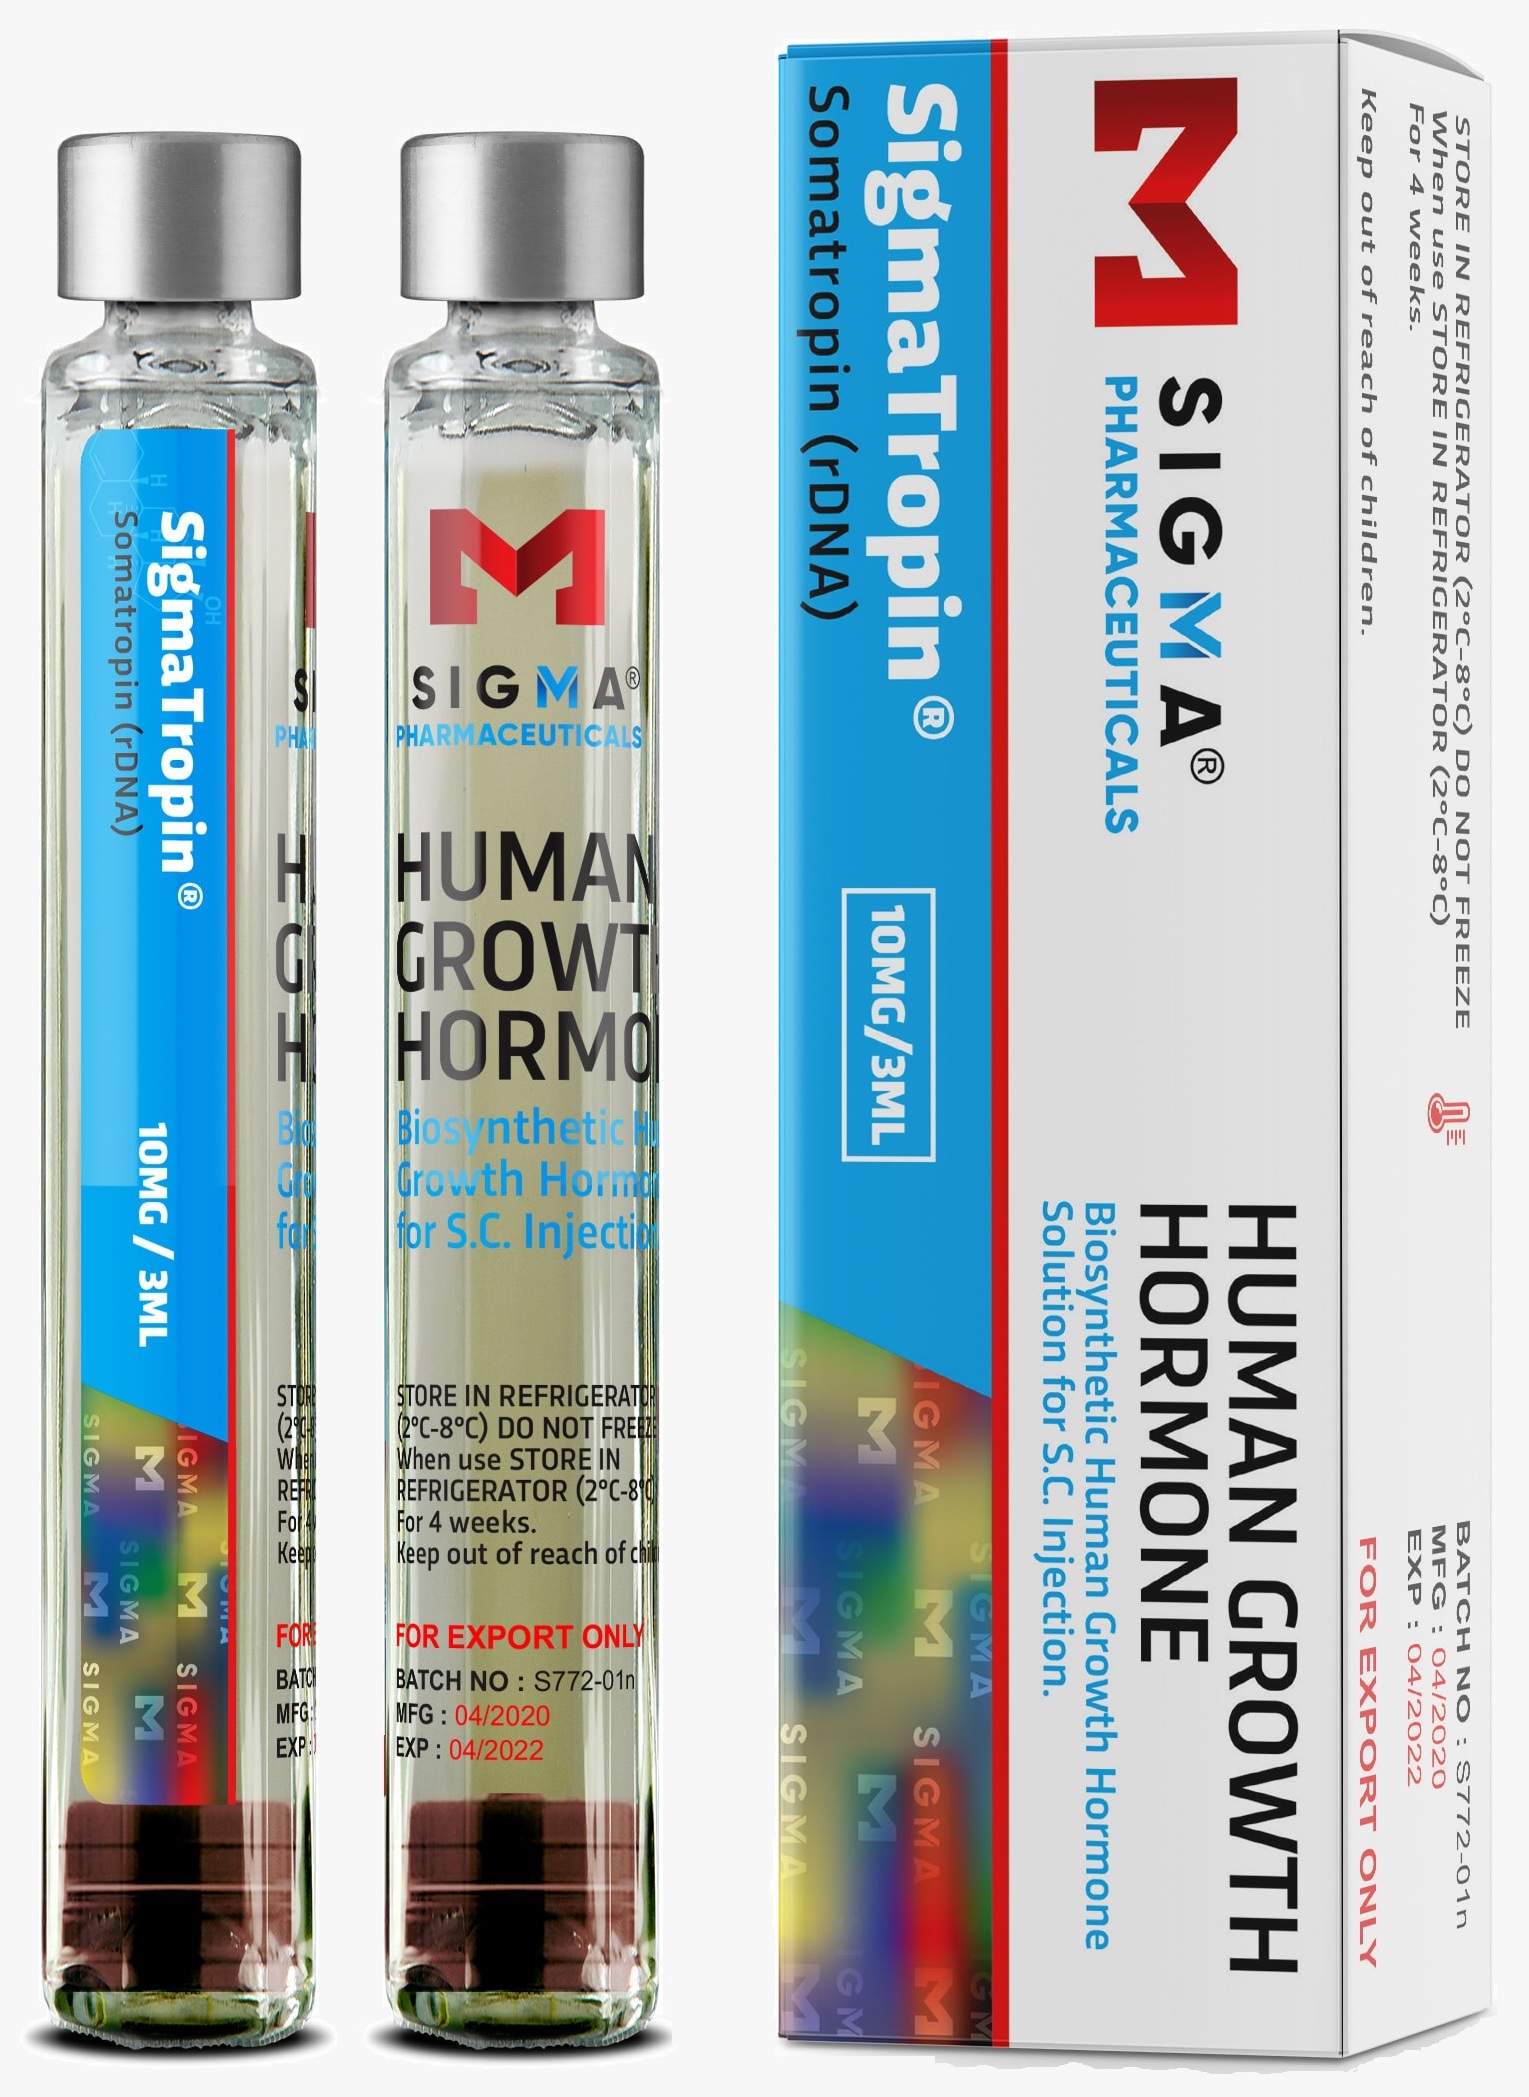 What is Human Growth Hormone (HGH)?